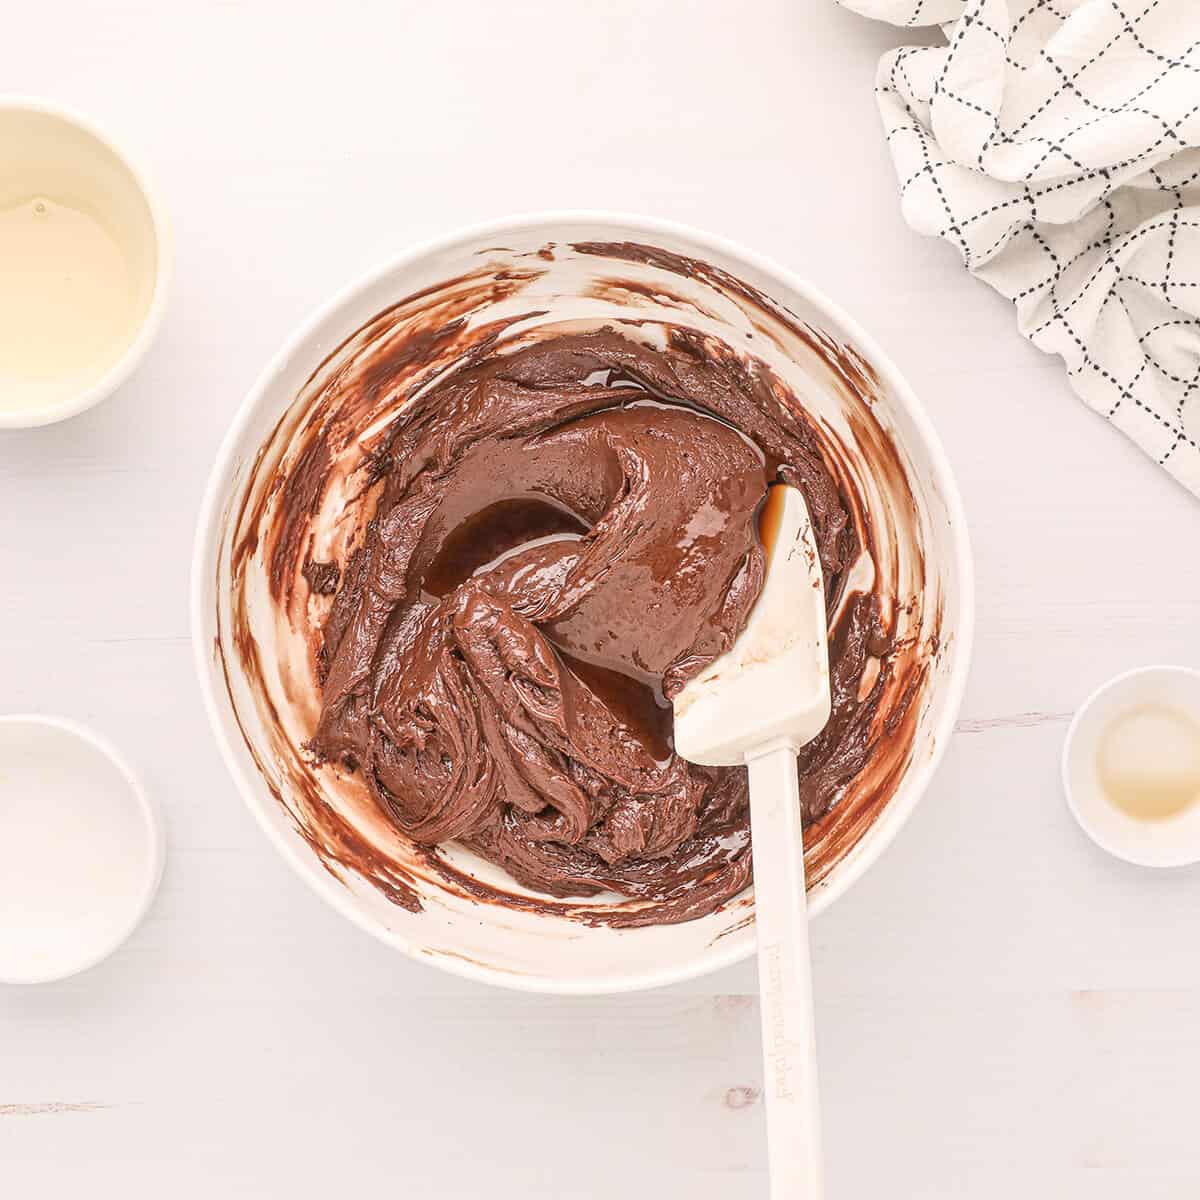 Butter and melted chocolate stirred together in a bowl.